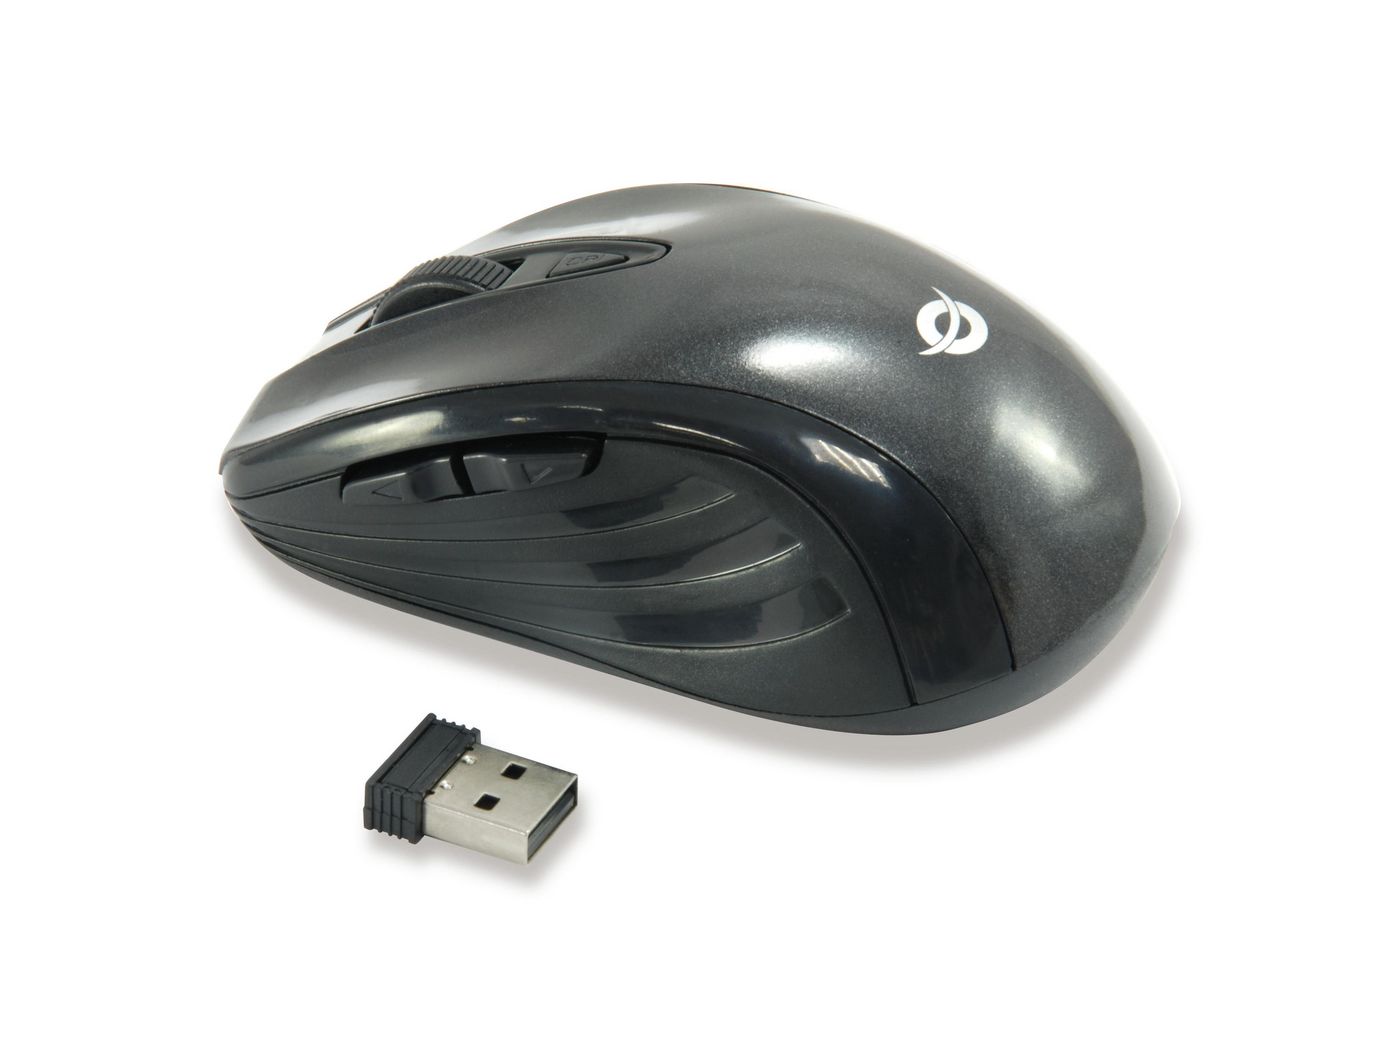 Conceptronic CLLM5BTRVWL Wireless optical Mouse